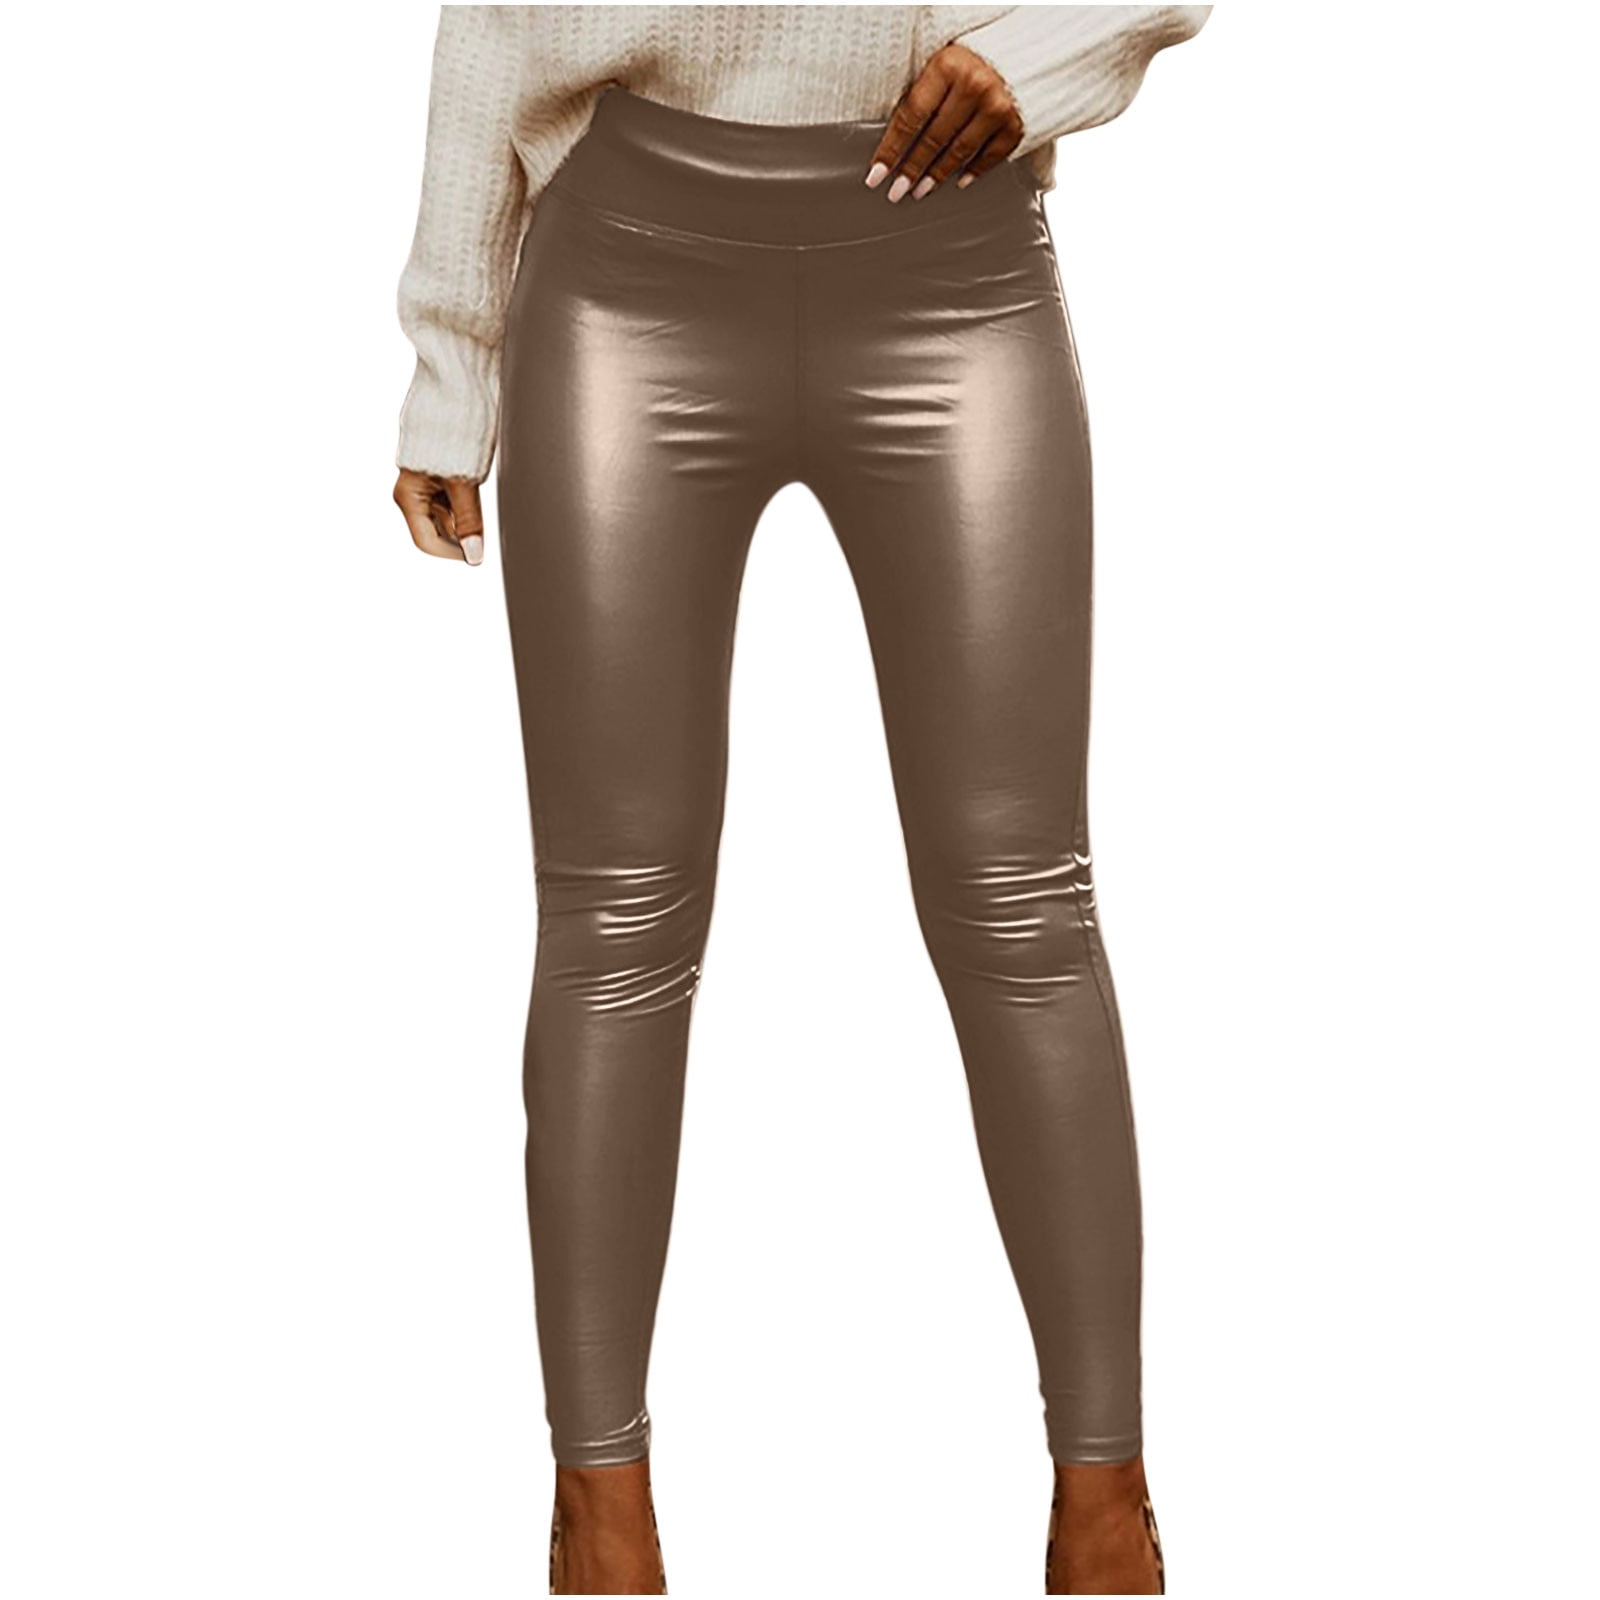 Melody Red Leather Jeans Women in Tight Leather Stretch Female Trousers  Butt Lift Shapewear Skinny Sport Casual Pants